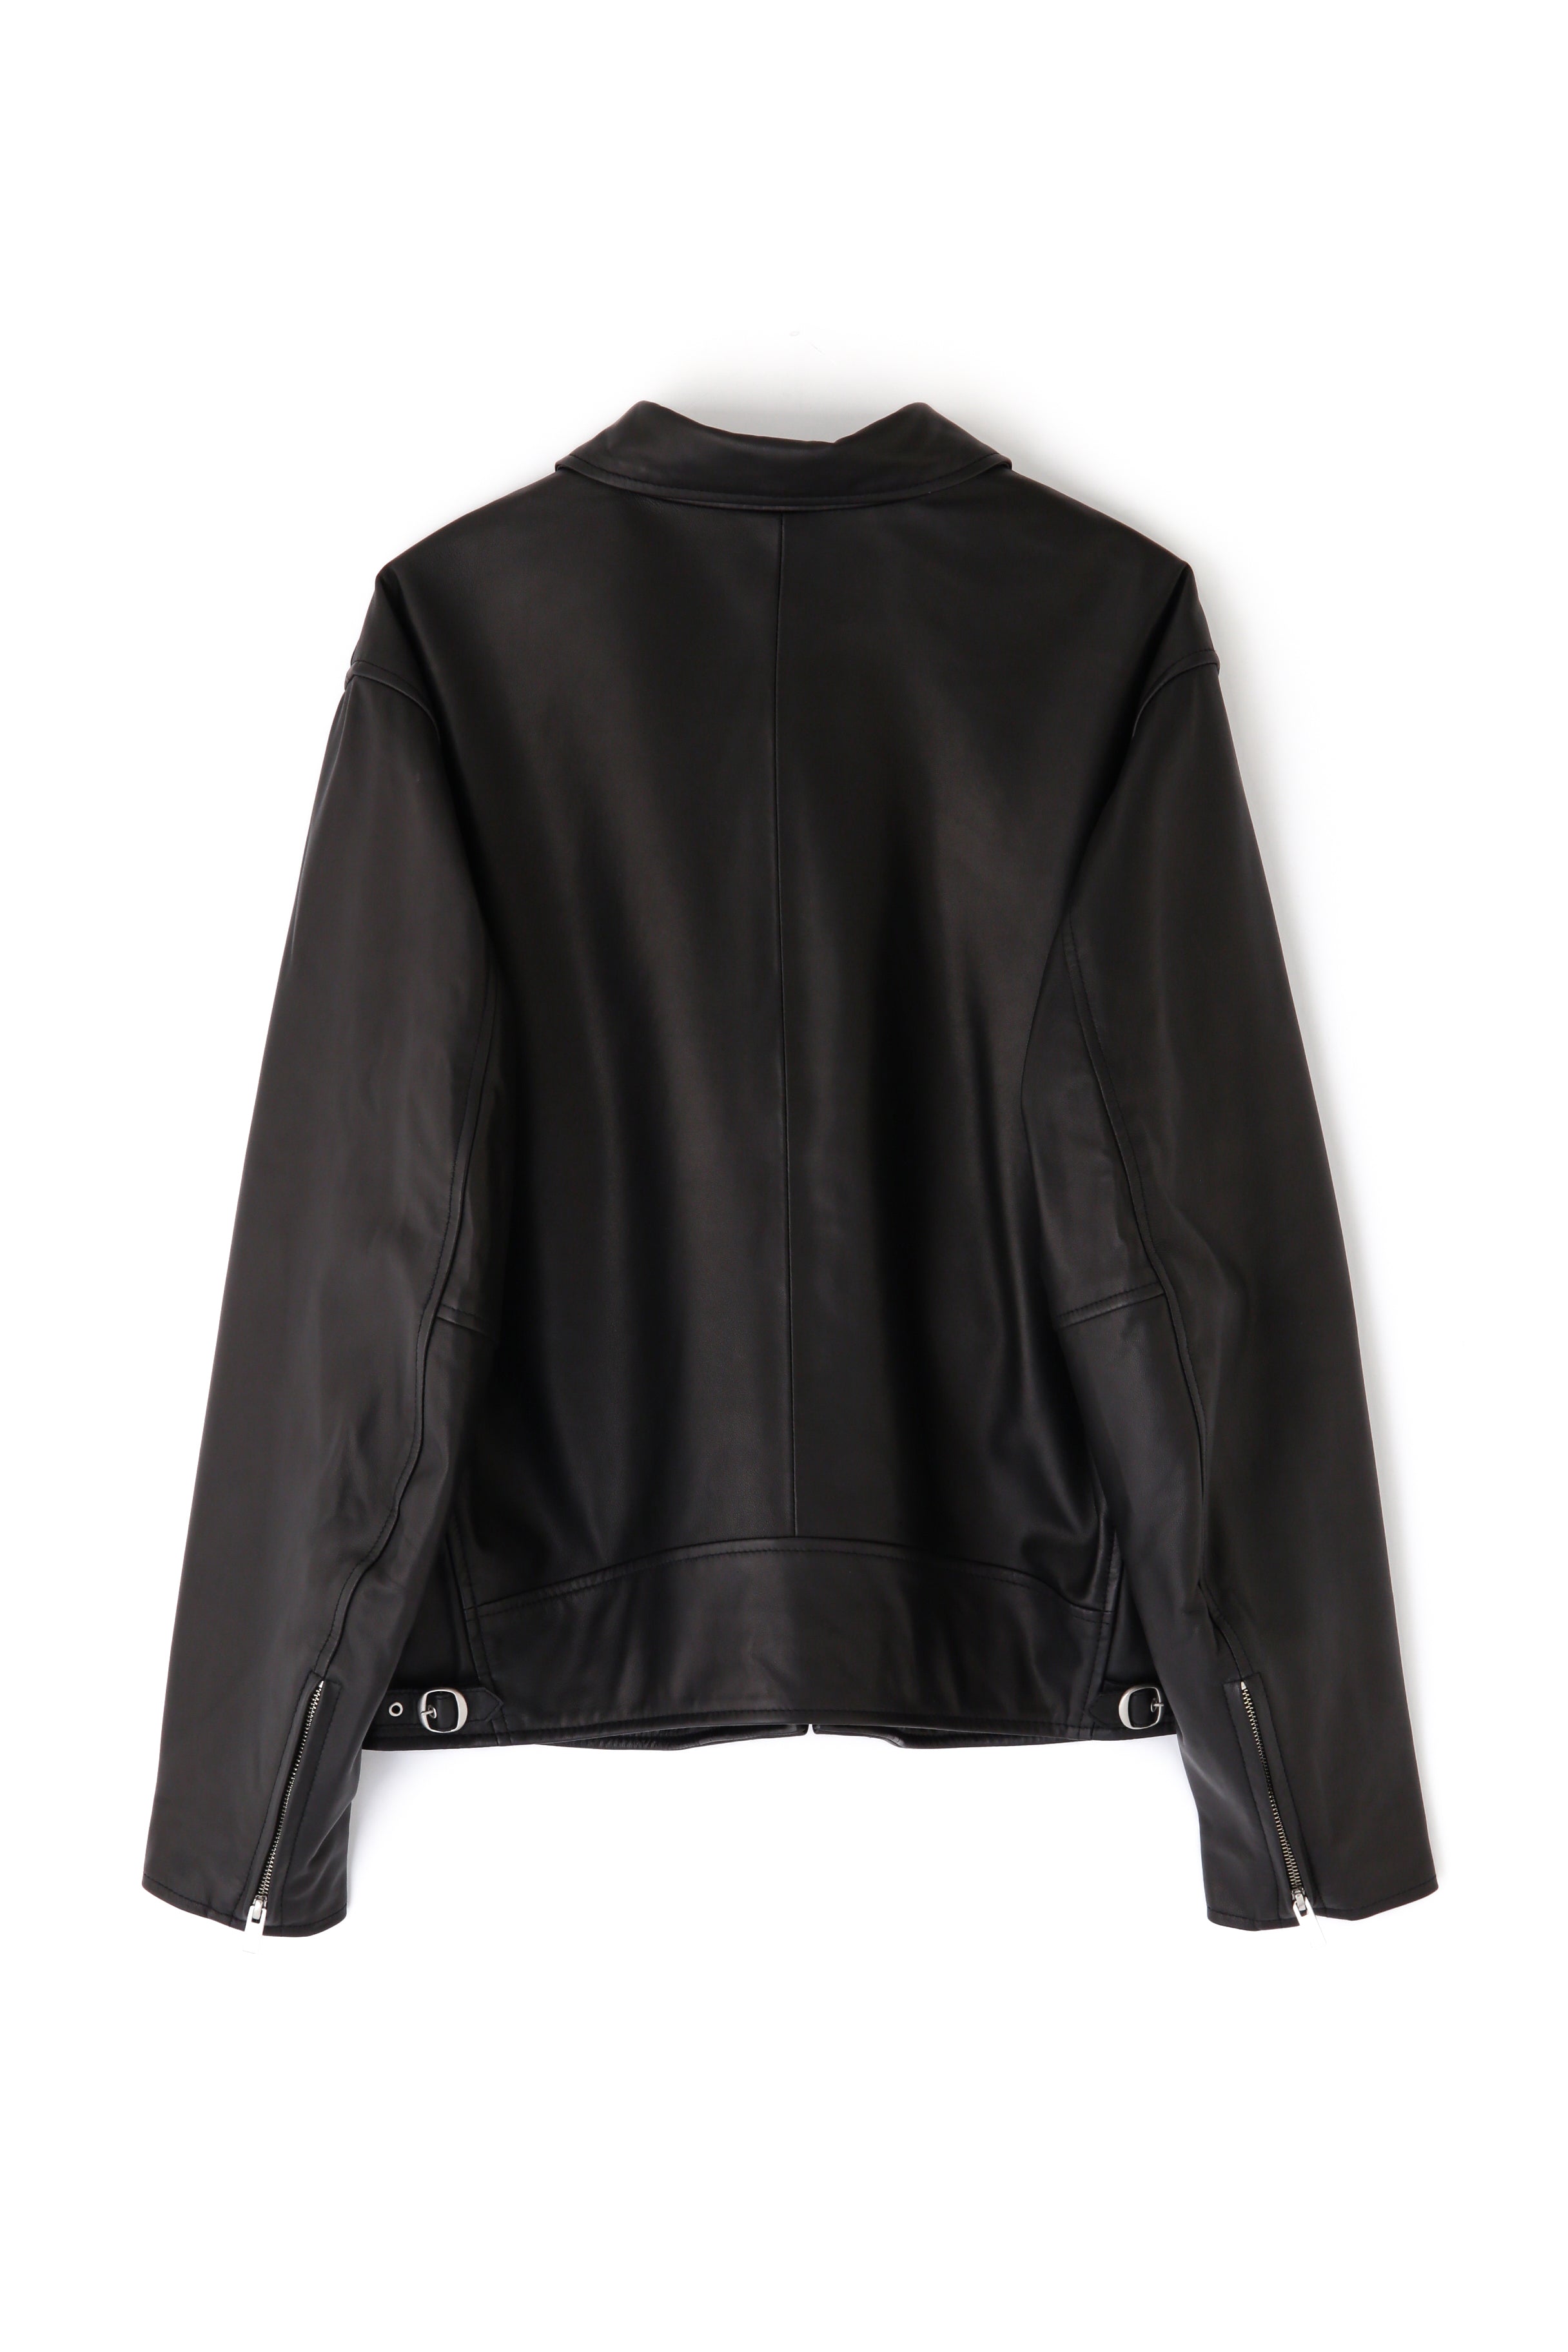 LEATHER RIDERS JACKET -Sheep leather- | SEVEN BY SEVEN